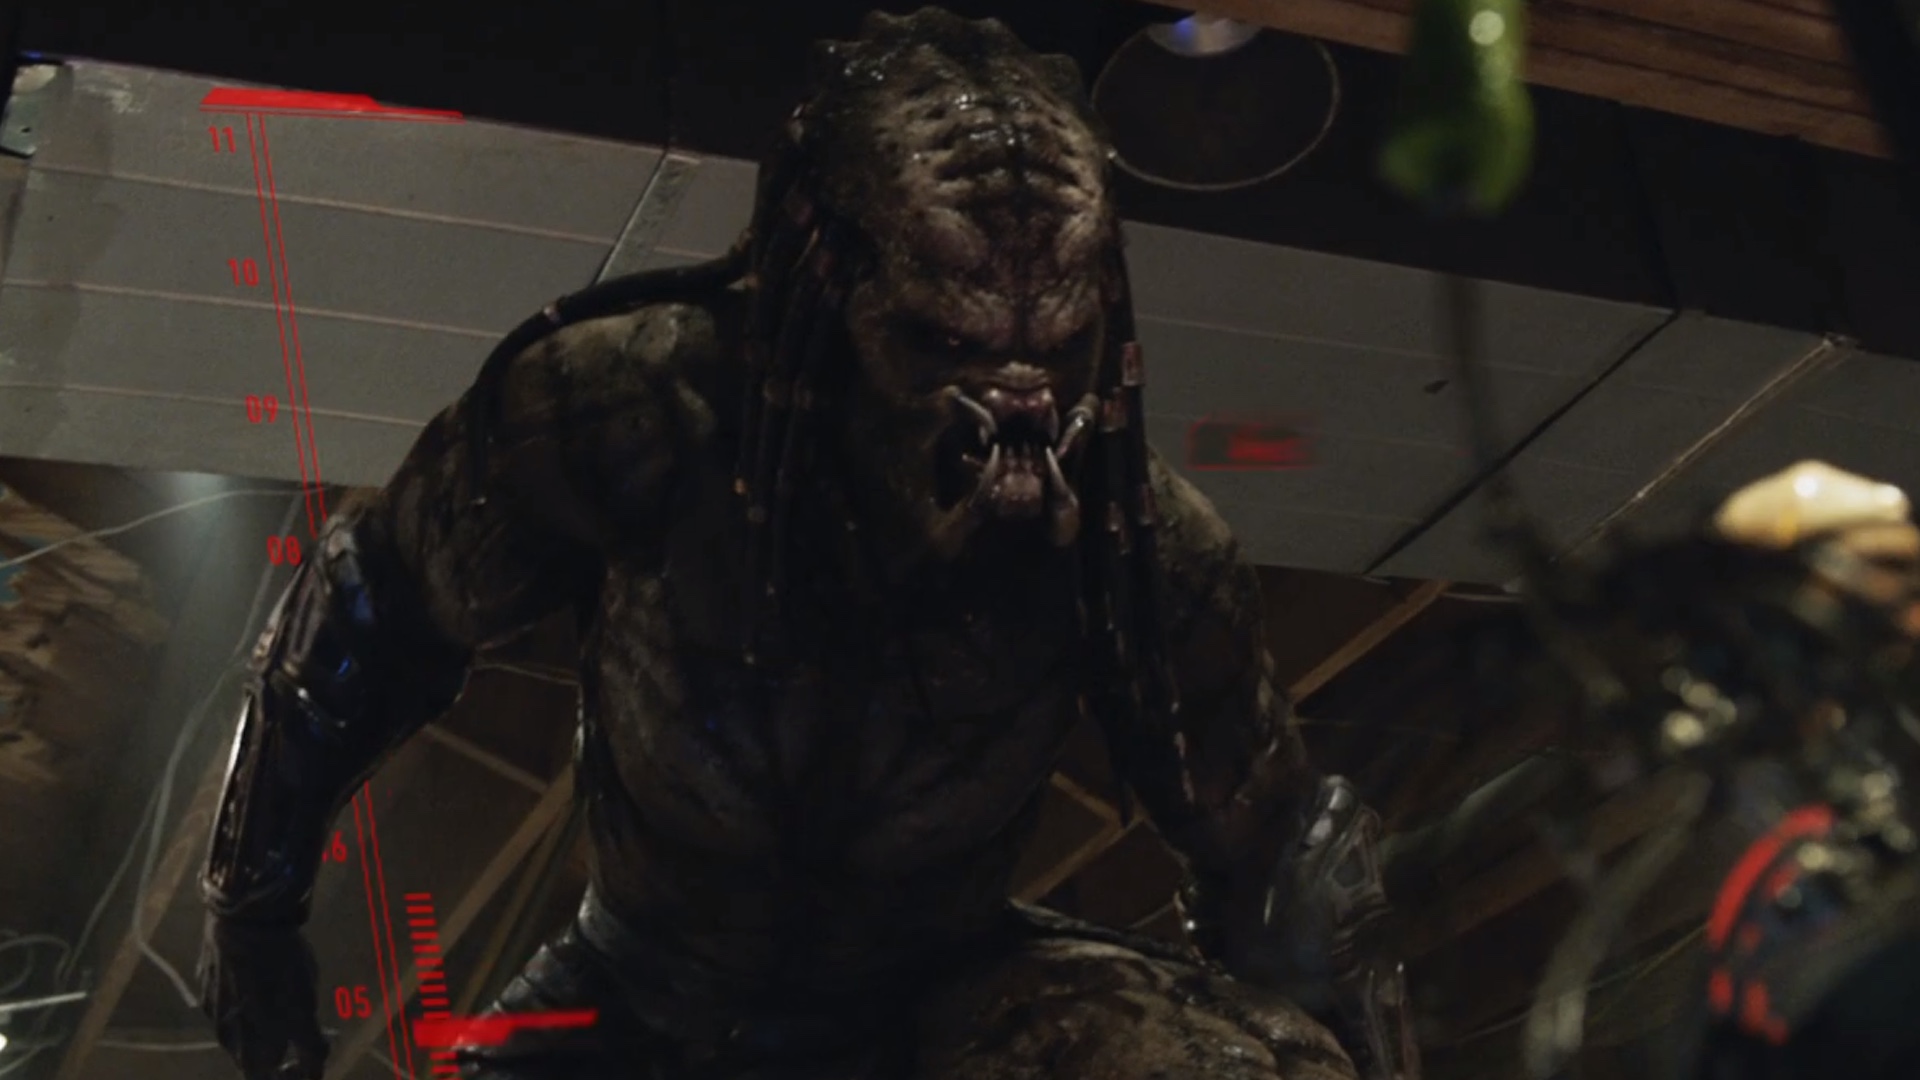 New Promo Video For The Predator Explains What Makes Ultimate